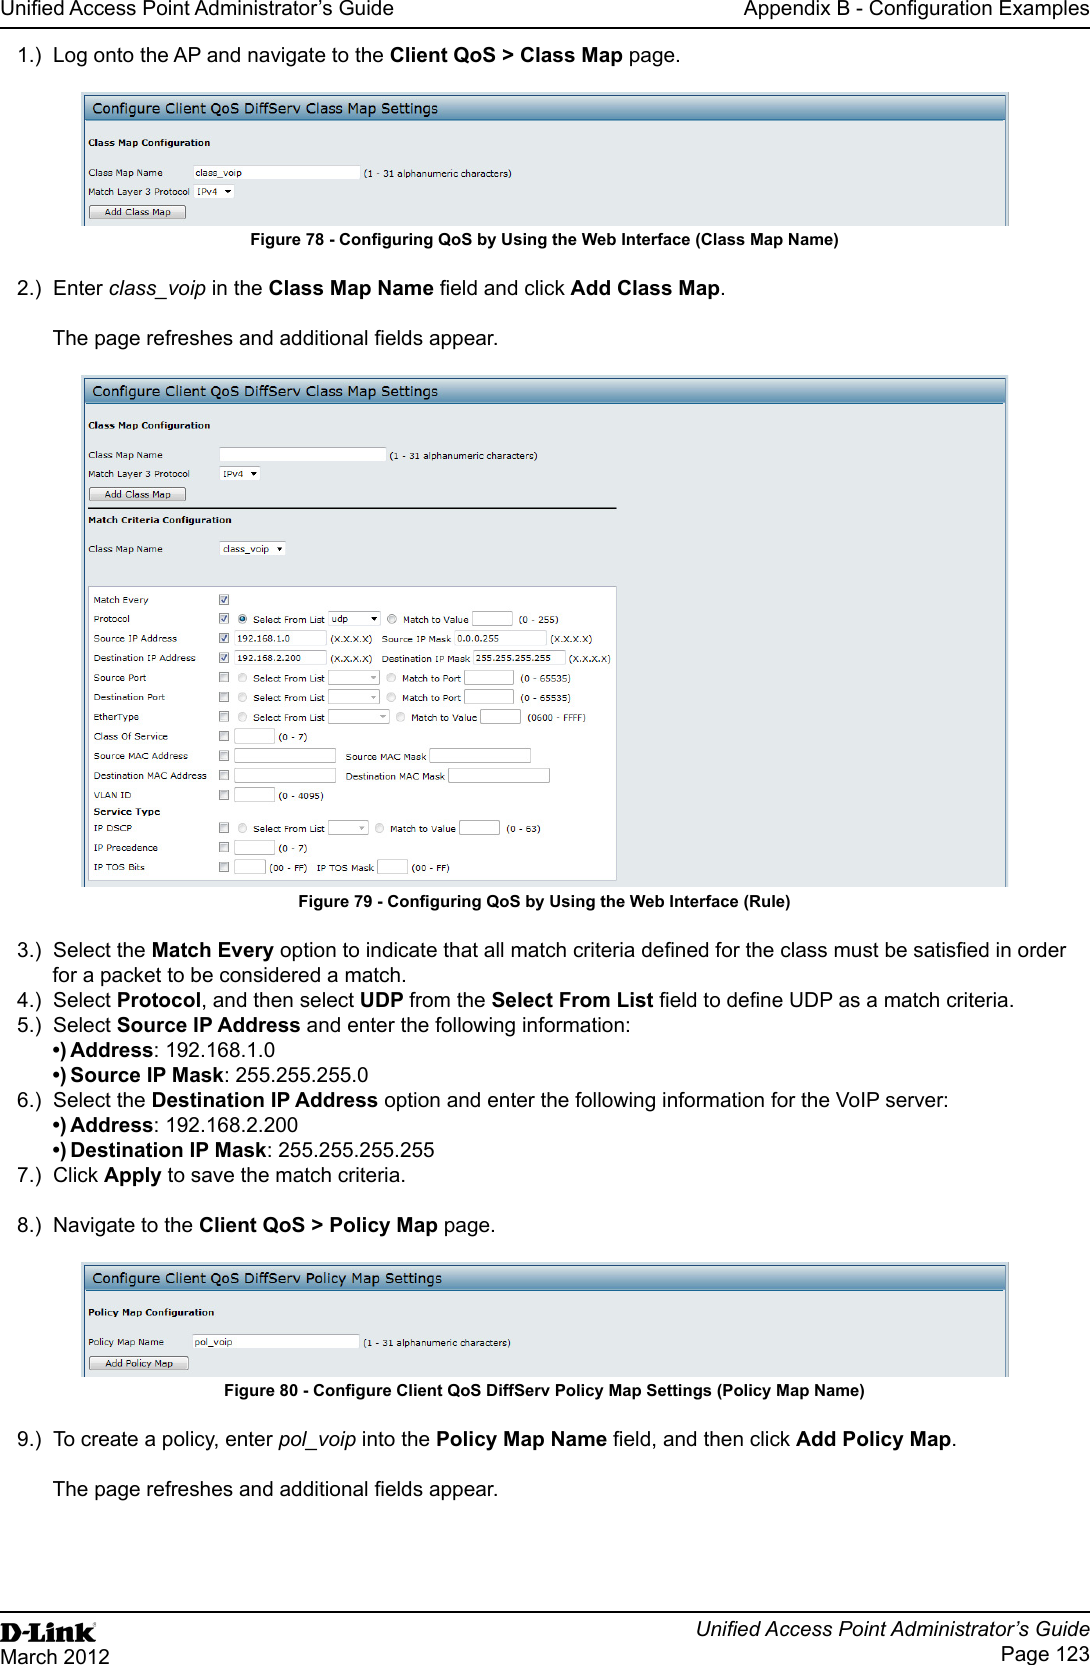 Unied Access Point Administrator’s GuideUnied Access Point Administrator’s GuidePage 123March 2012Appendix B - Conguration Examples1.)  Log onto the AP and navigate to the Client QoS &gt; Class Map page.Figure 78 - Conguring QoS by Using the Web Interface (Class Map Name)2.)  Enter class_voip in the Class Map Name eld and click Add Class Map.The page refreshes and additional elds appear. Figure 79 - Conguring QoS by Using the Web Interface (Rule)3.)  Select the Match Every option to indicate that all match criteria dened for the class must be satised in order for a packet to be considered a match.4.)  Select Protocol, and then select UDP from the Select From List eld to dene UDP as a match criteria. 5.)  Select Source IP Address and enter the following information: •) Address: 192.168.1.0•) Source IP Mask: 255.255.255.06.)  Select the Destination IP Address option and enter the following information for the VoIP server:•) Address: 192.168.2.200•) Destination IP Mask: 255.255.255.2557.)  Click Apply to save the match criteria.8.)  Navigate to the Client QoS &gt; Policy Map page.Figure 80 - Congure Client QoS DiffServ Policy Map Settings (Policy Map Name)9.)  To create a policy, enter pol_voip into the Policy Map Name eld, and then click Add Policy Map.The page refreshes and additional elds appear.